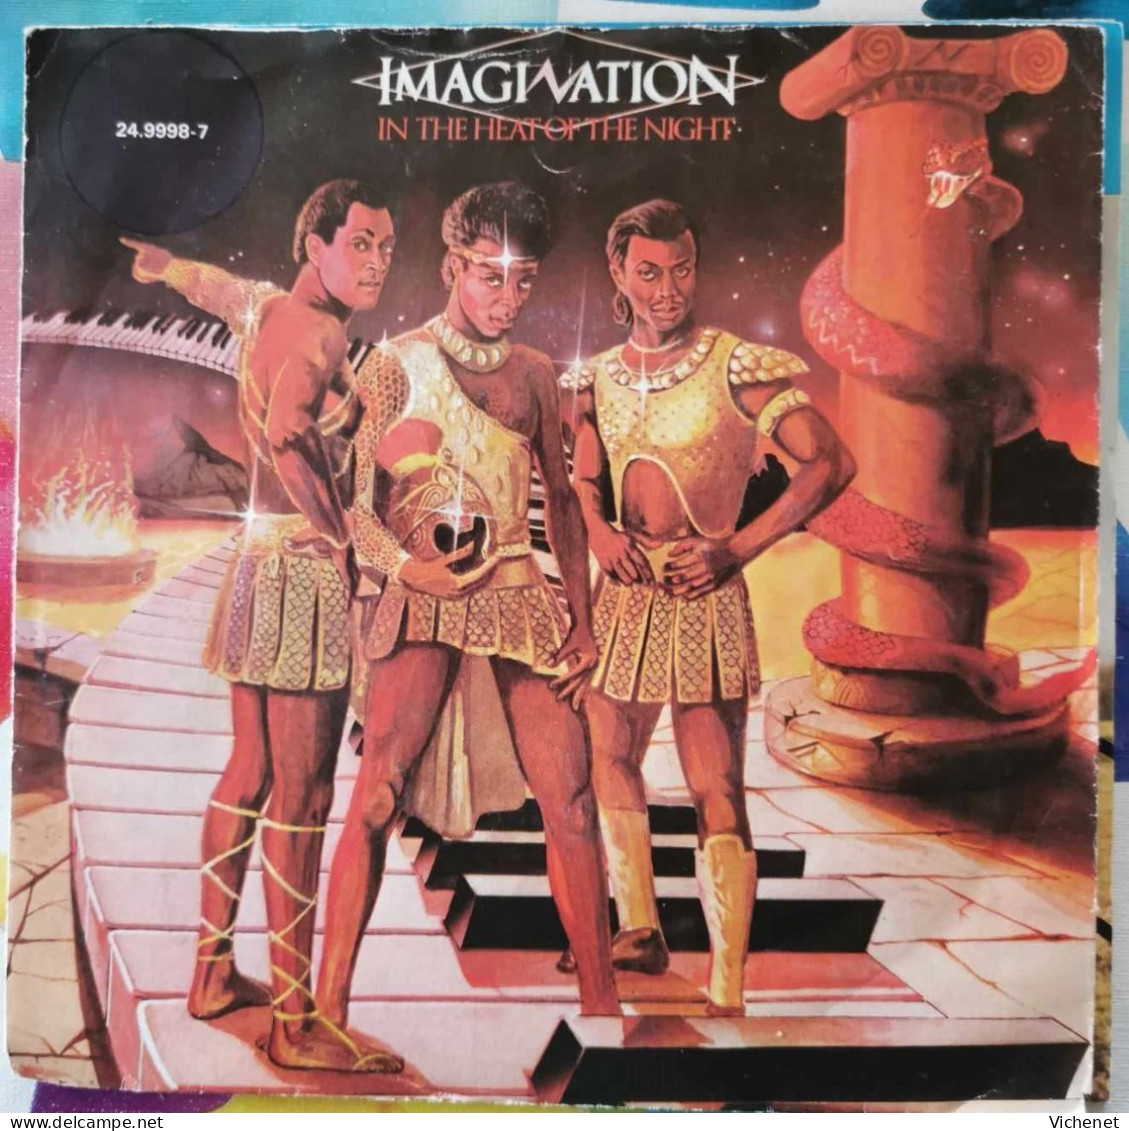 Imagination – In The Heat Of The Night - 45T - Disco, Pop